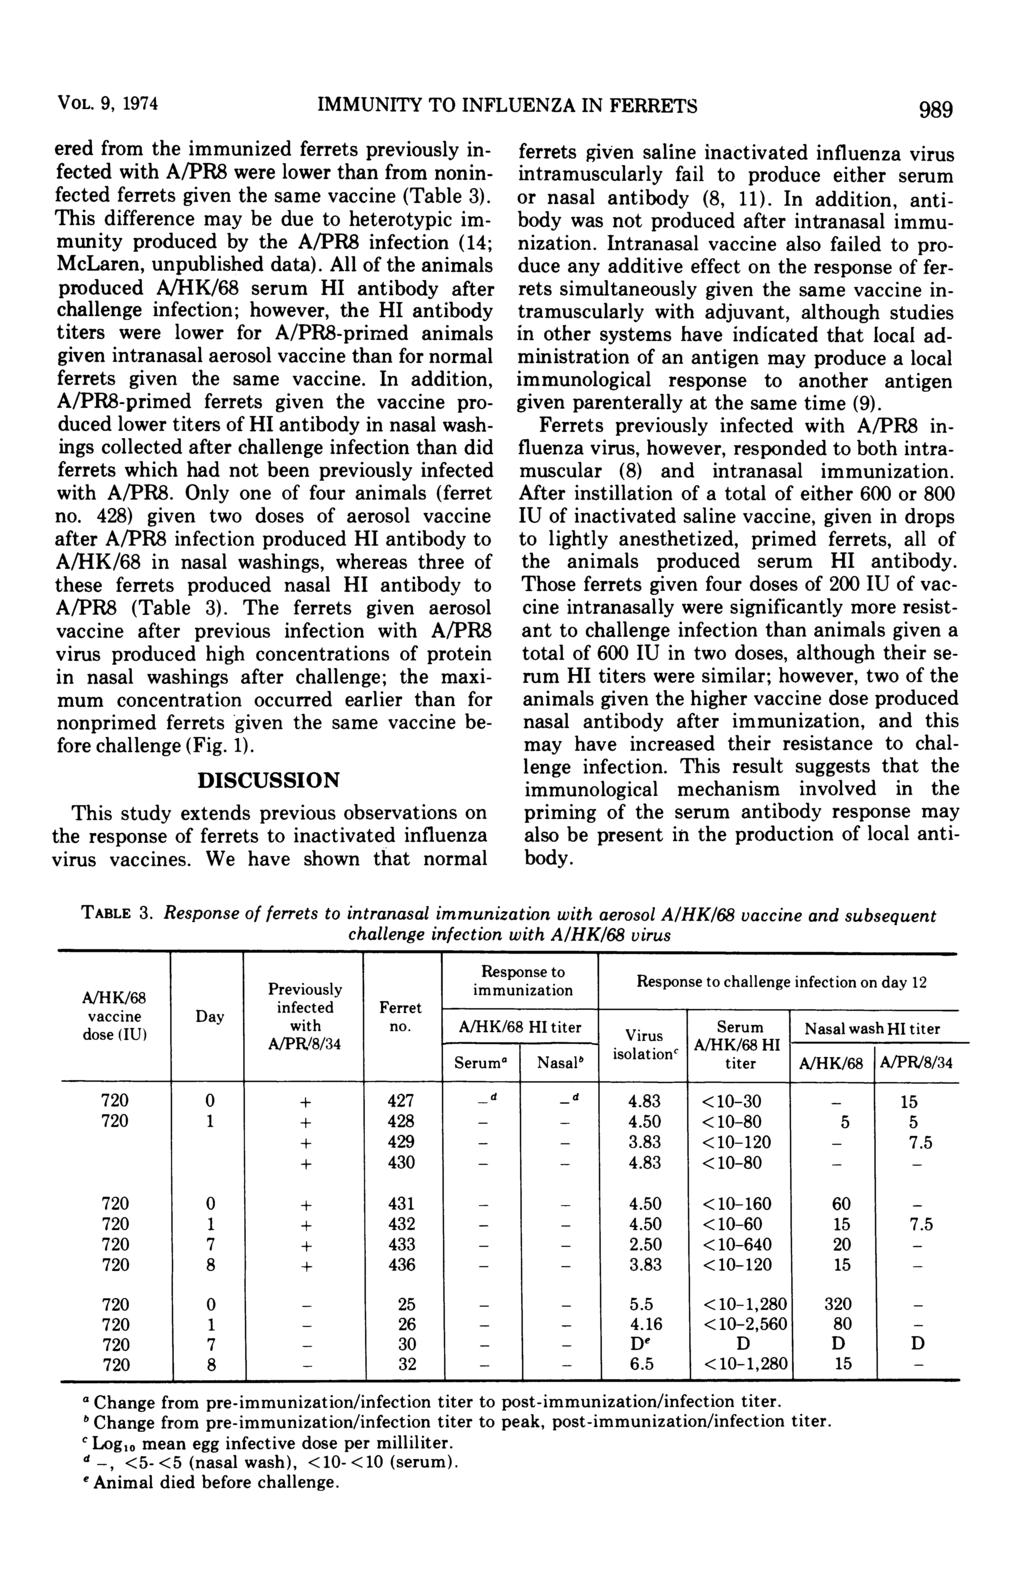 VOL. 9, 1974 IMMUNITY TO INFLUENZA IN FERRETS 989 ered from the immunized ferrets previously infected with A/PR8 were lower than from noninfected ferrets given the same vaccine (Table 3).